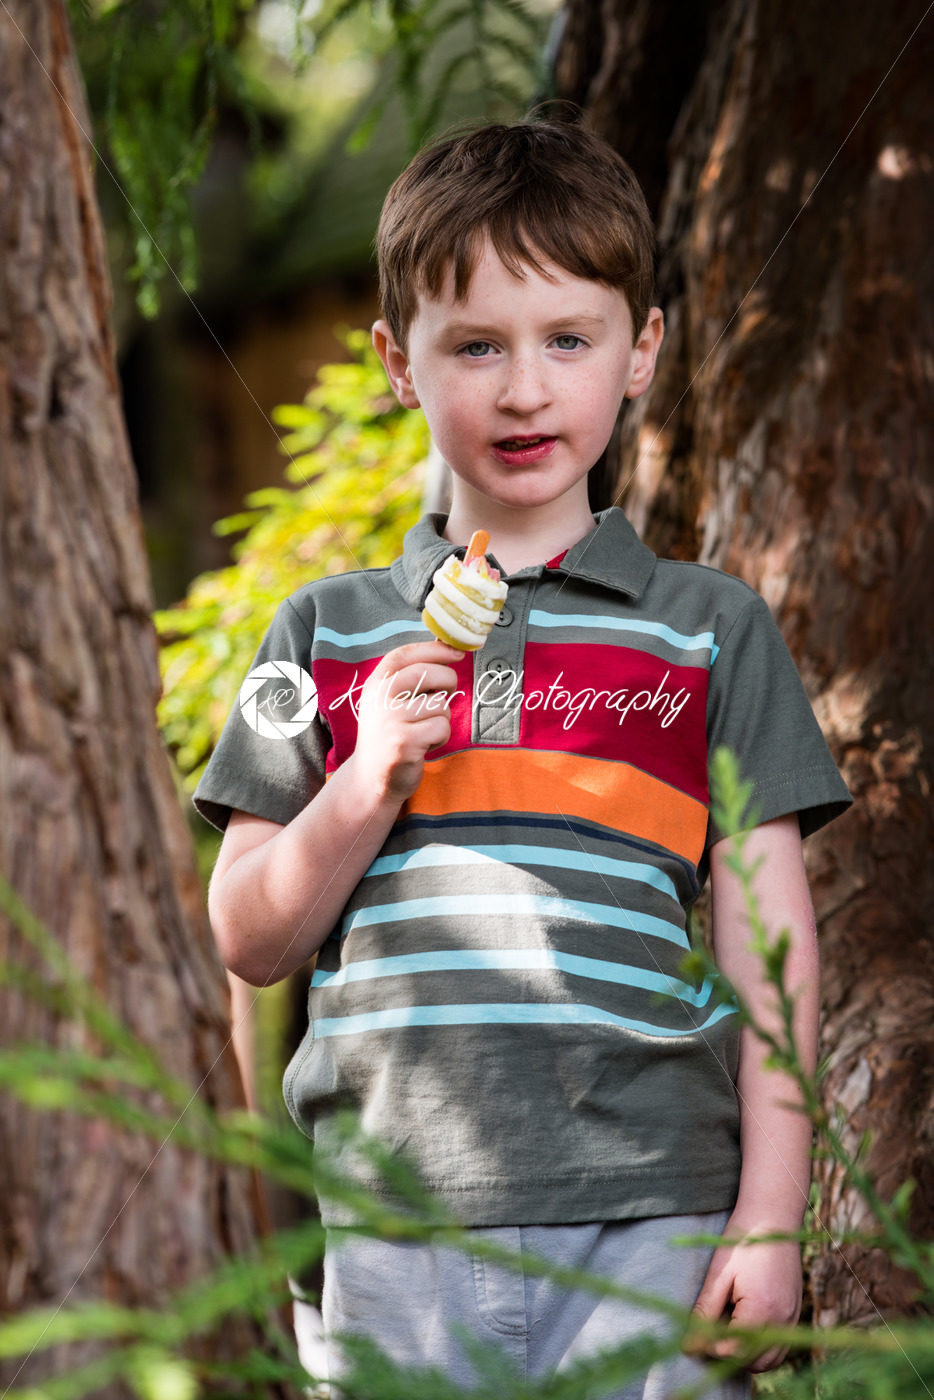 Young little boy portrait eating popsicle looking at camera - Kelleher Photography Store